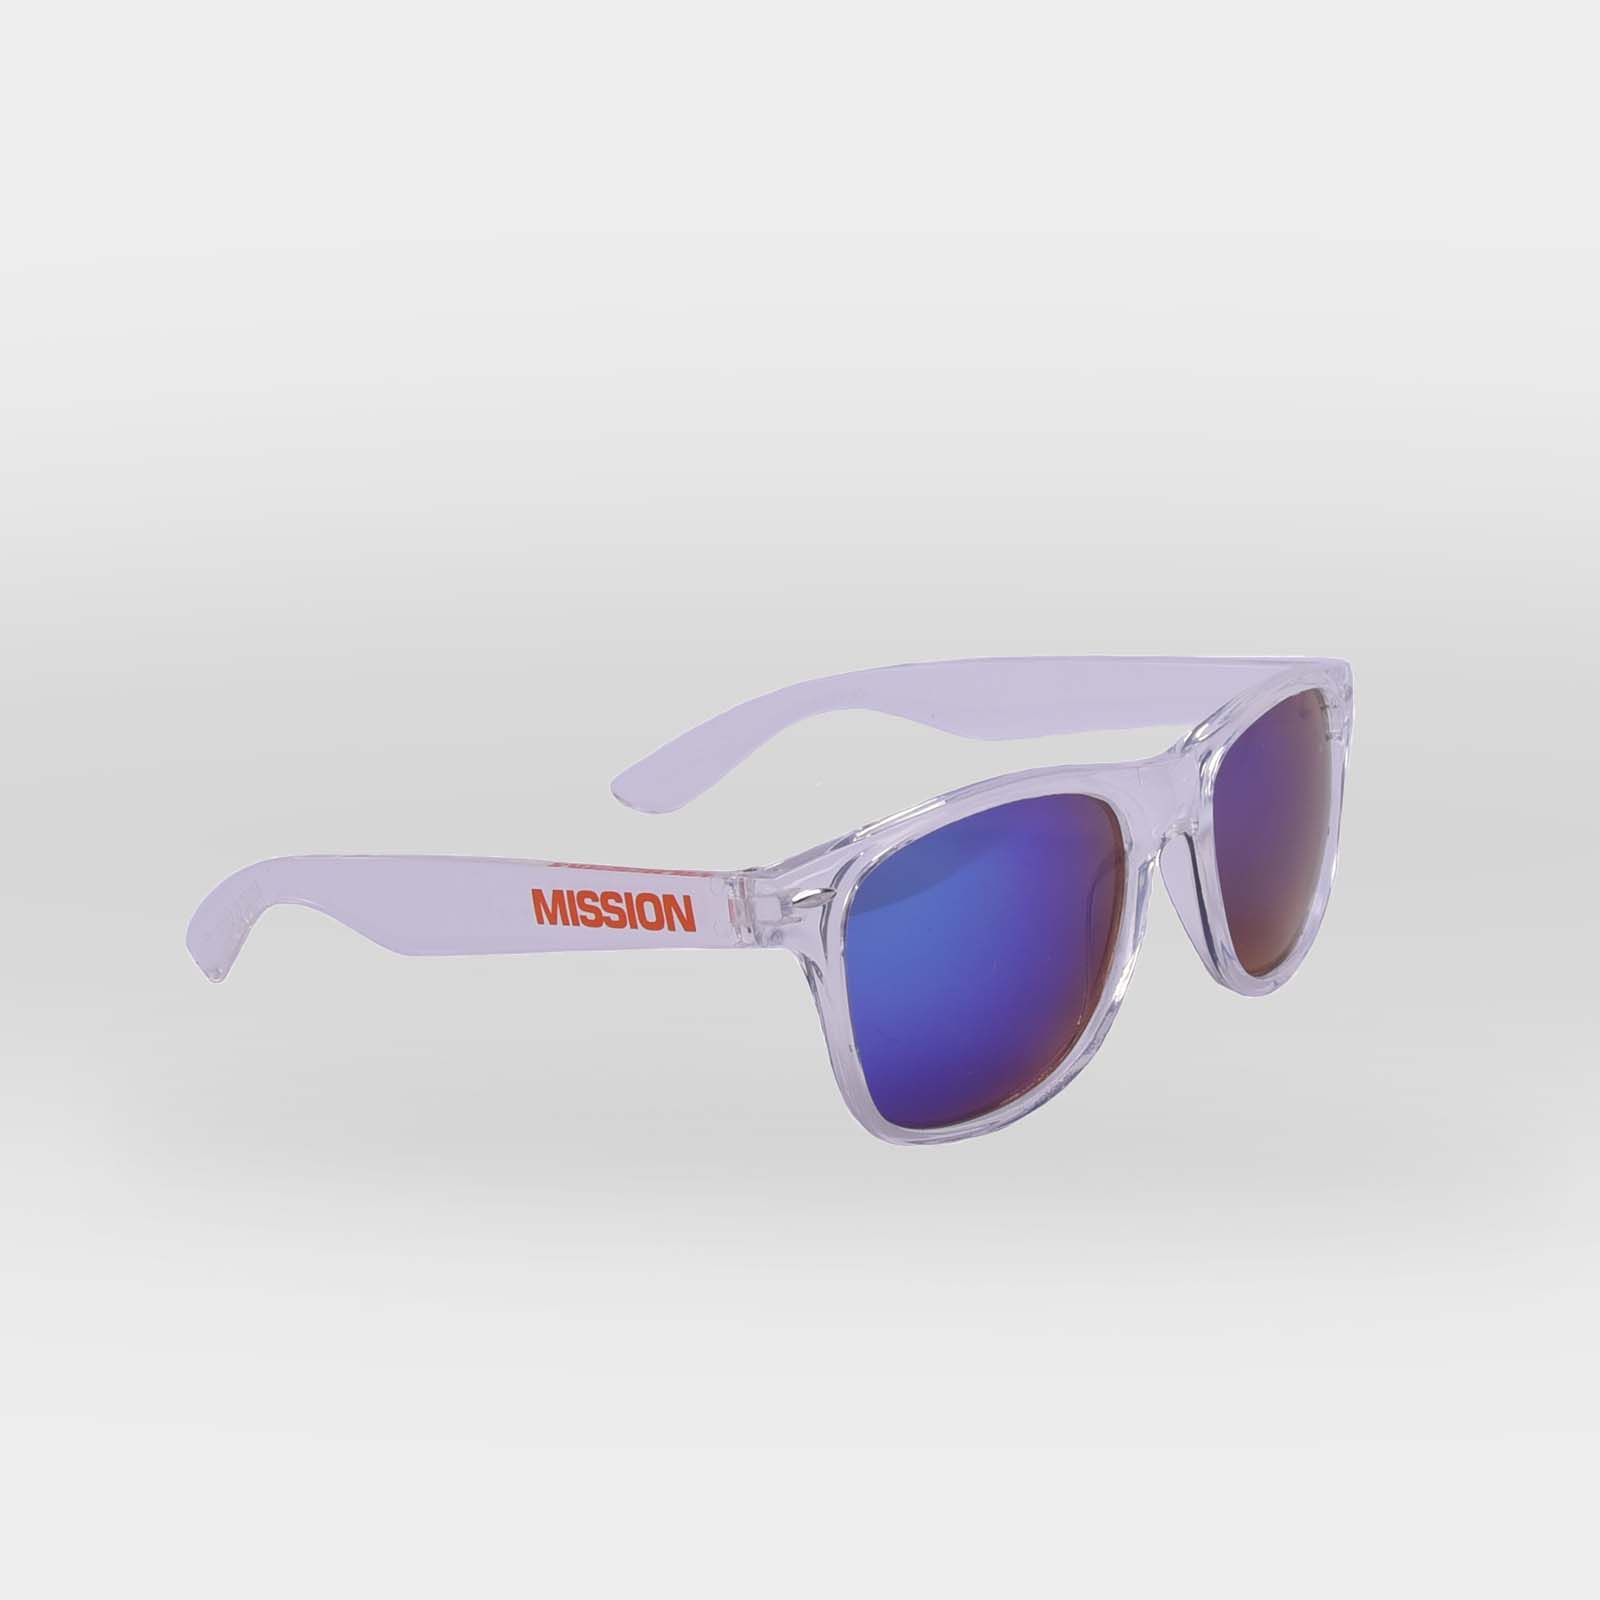 Mission official clear frame sunglasses